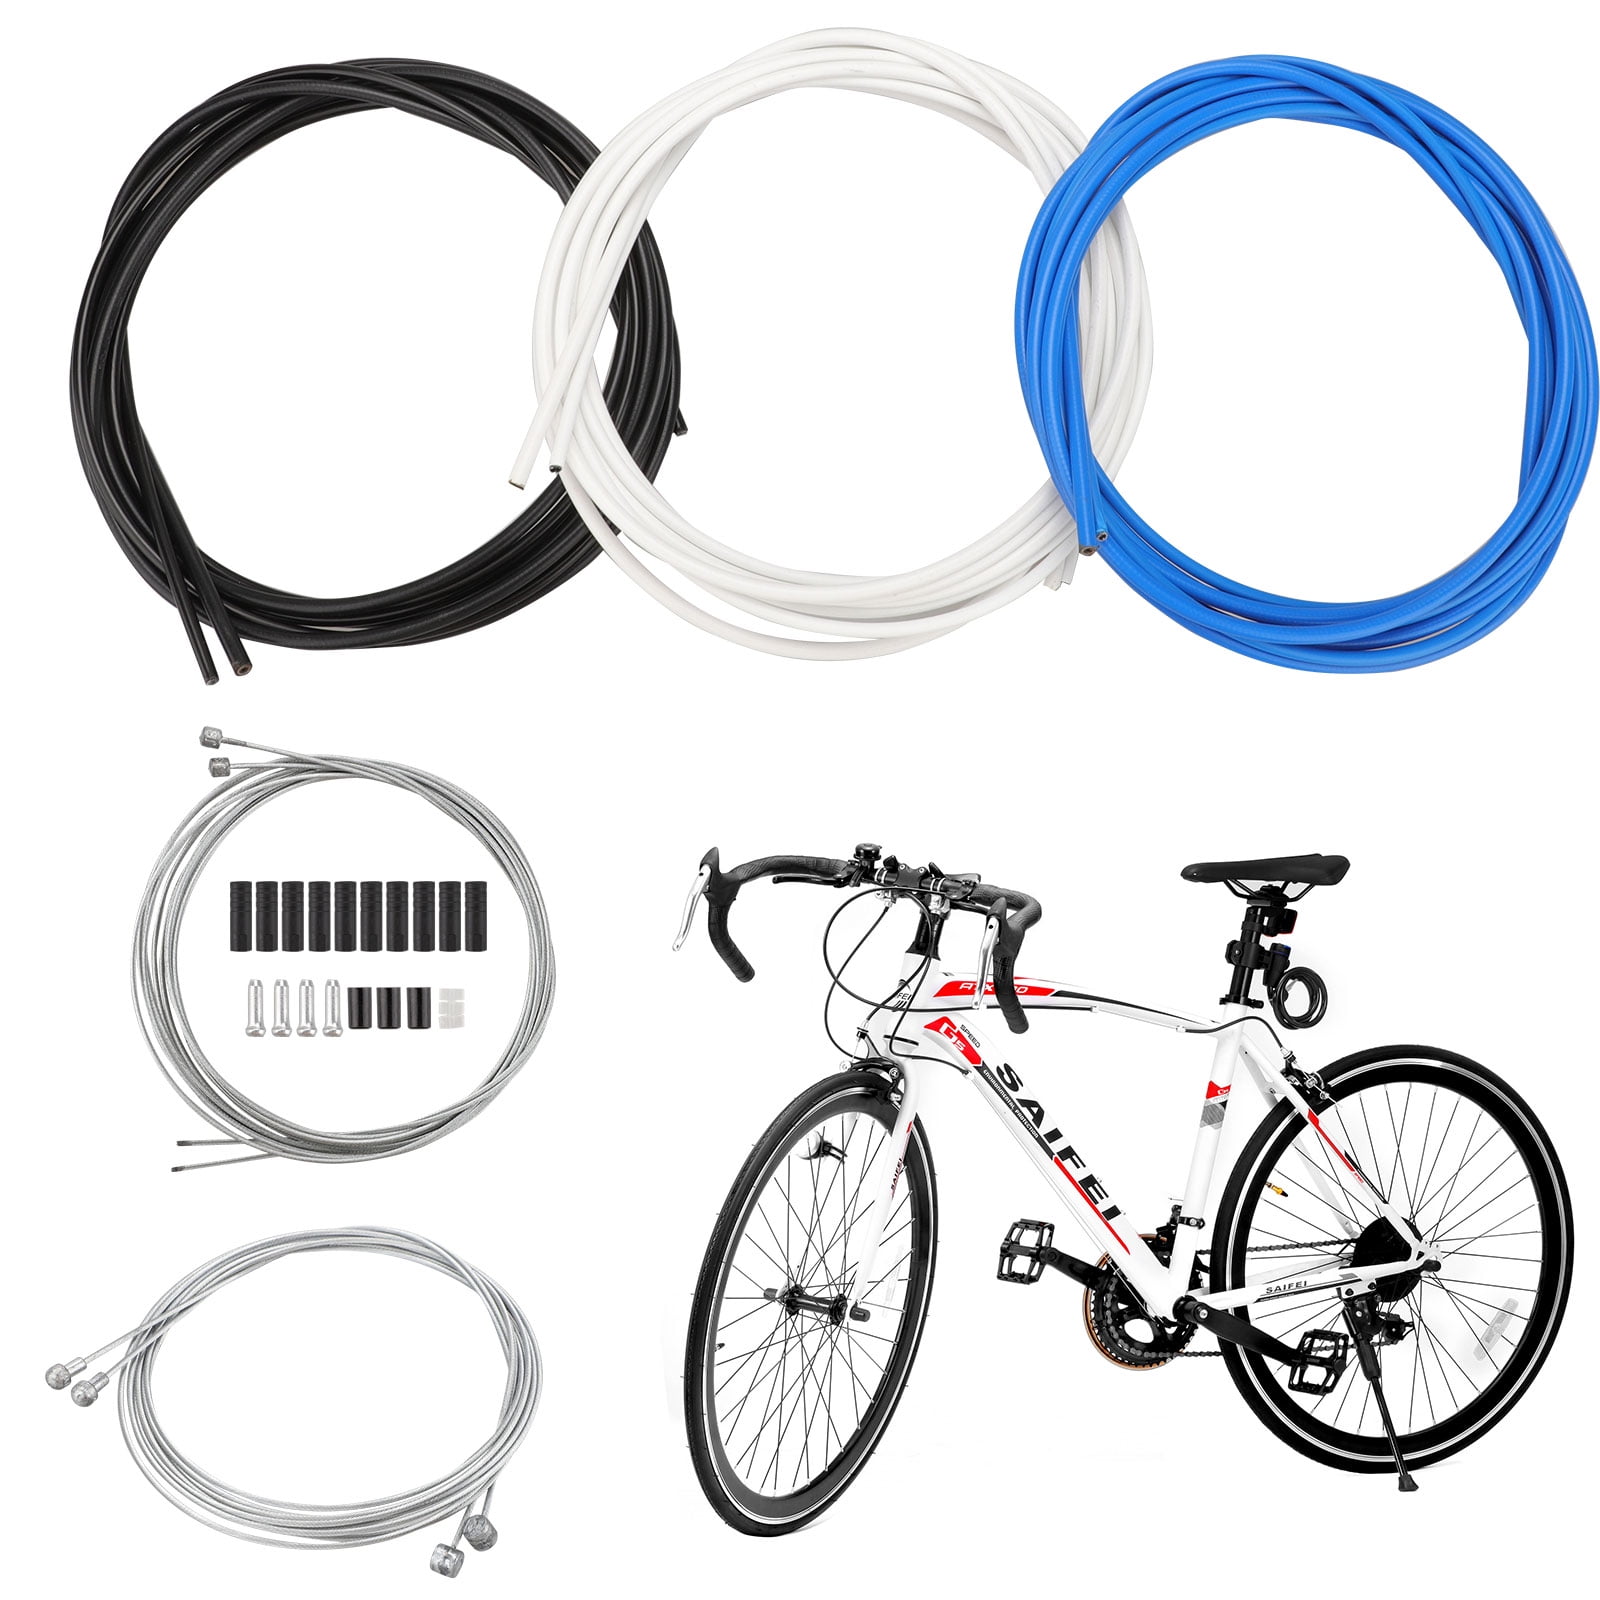 Bike Shift Cable Set Bike Wire Shifter Cable with Line Tube and Copper Head Black Rubber Cover Brake Wire Tube Kit